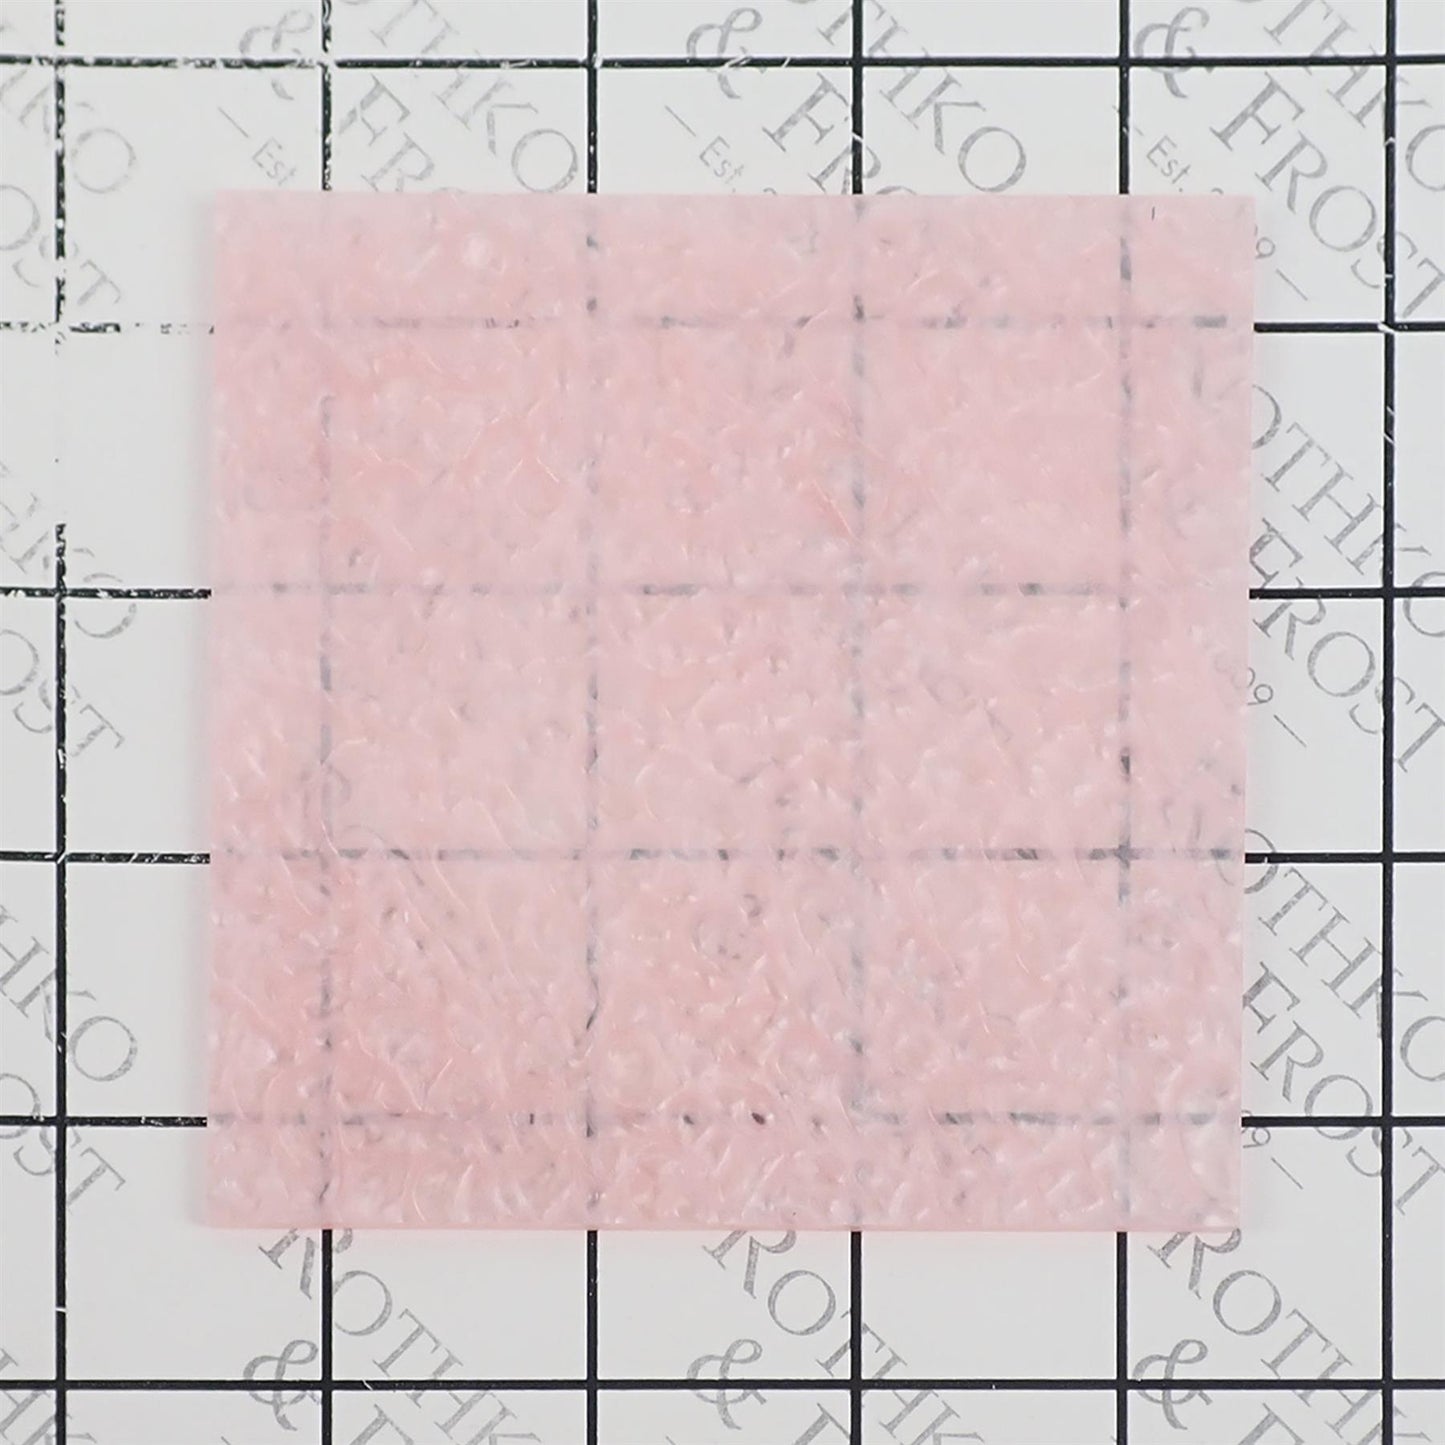 Incudo Baby Pink Lava Pearl Acrylic Sheet - 300x250x3mm